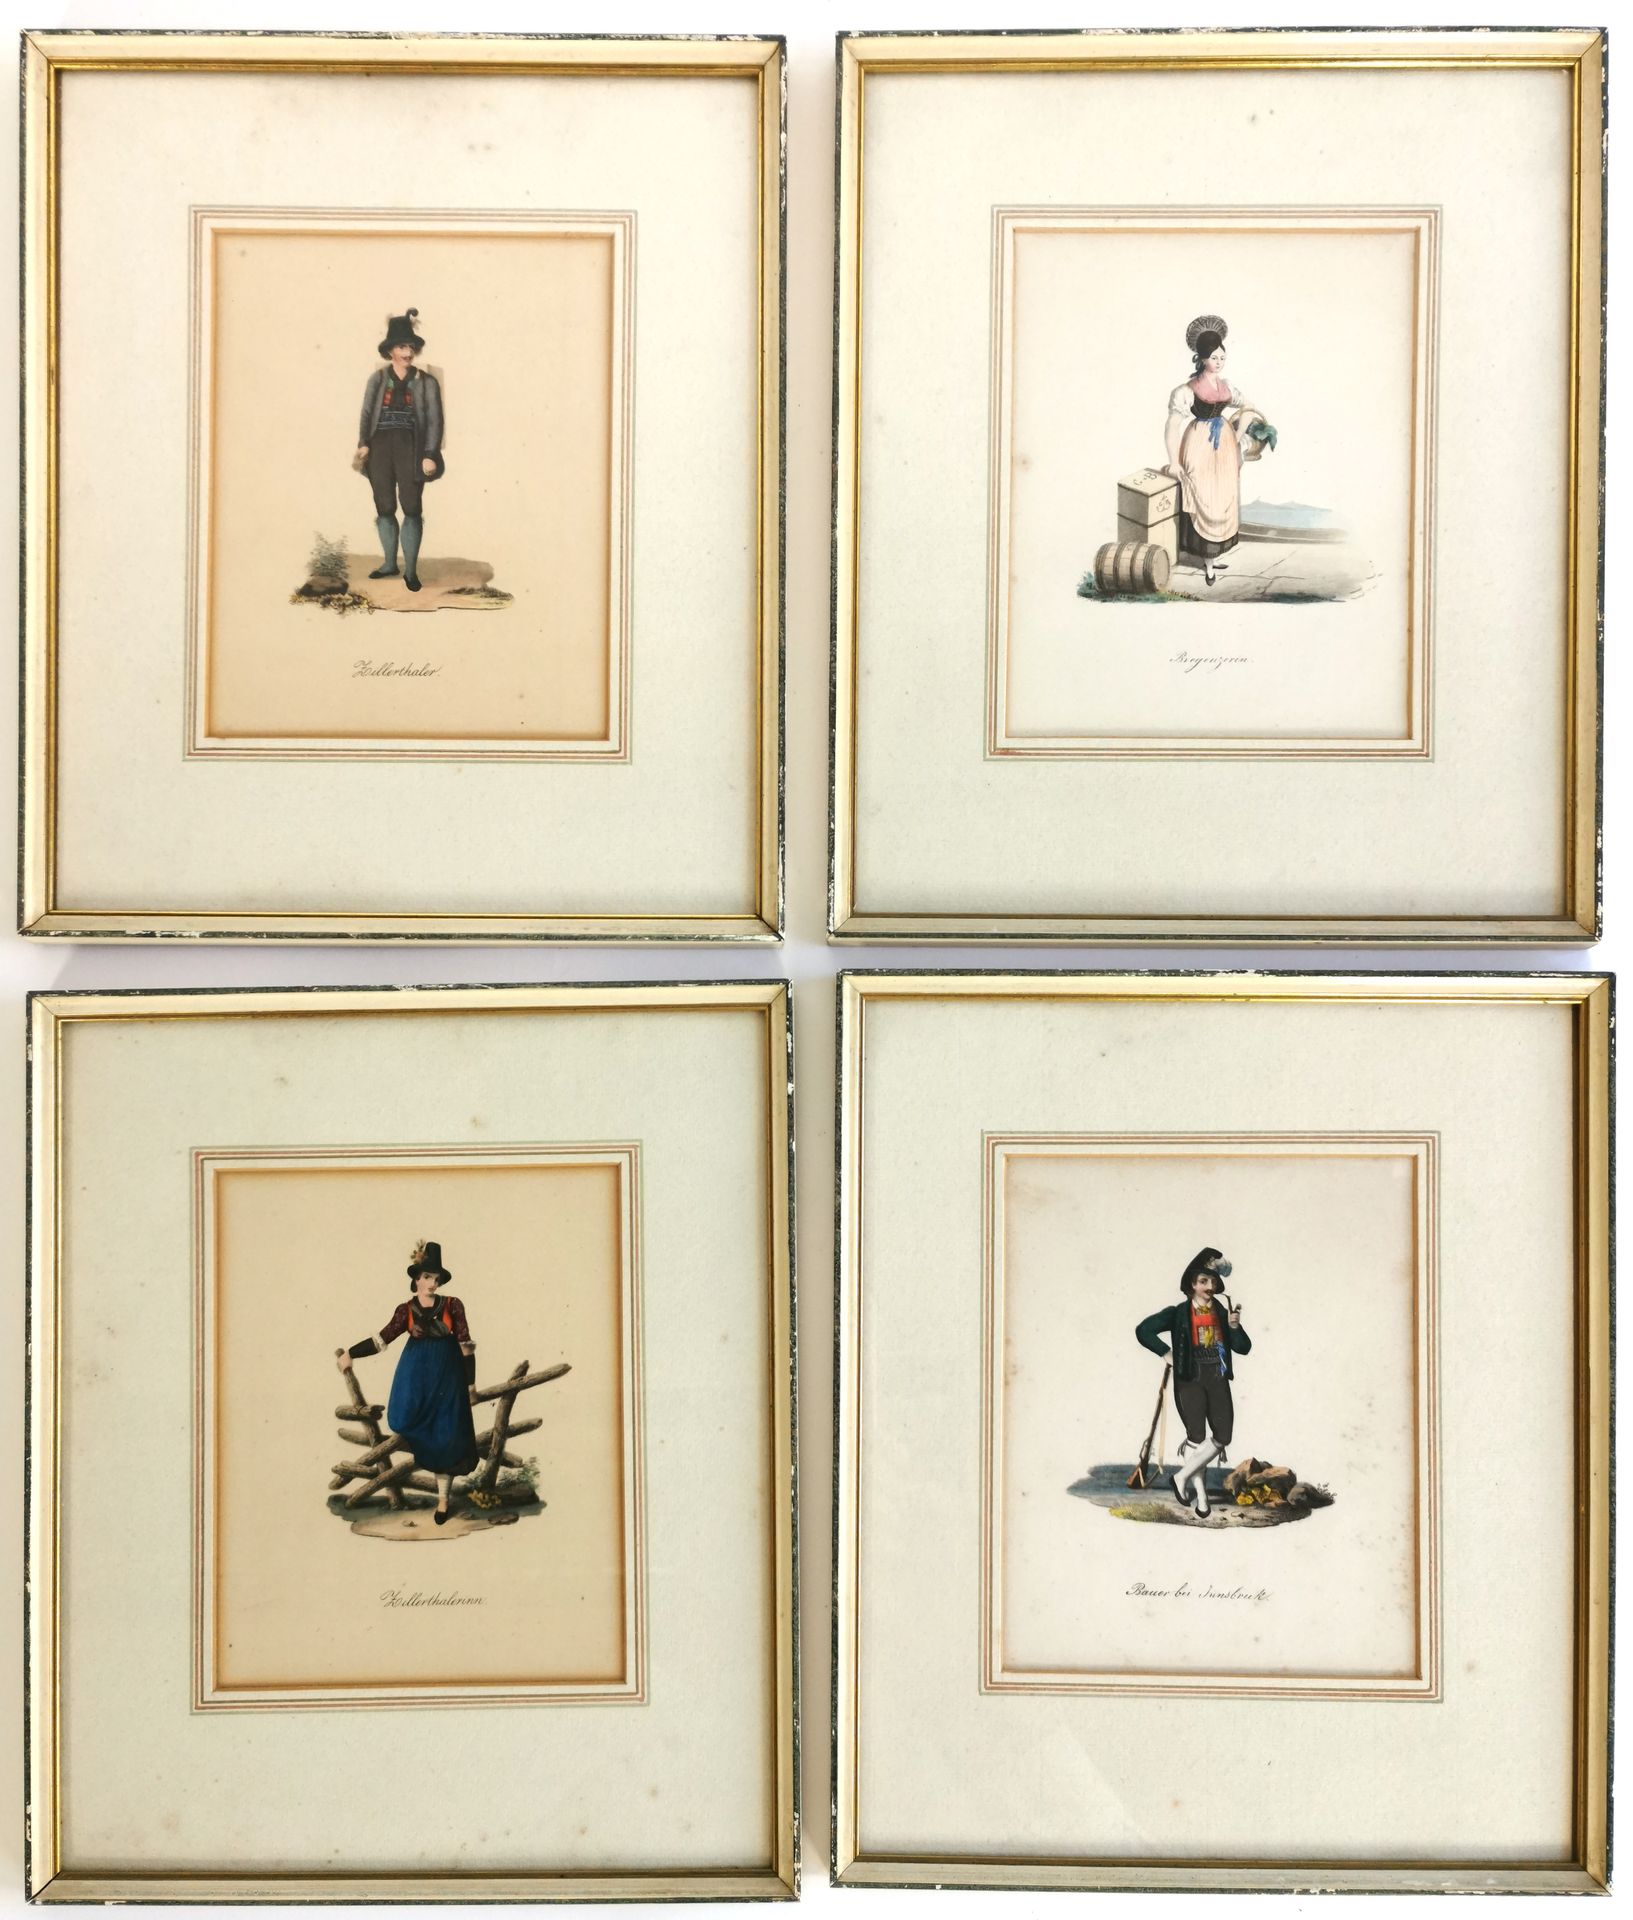 Null Ancient crafts

Suite of four German lithographic reproductions

16 x 13 cm&hellip;